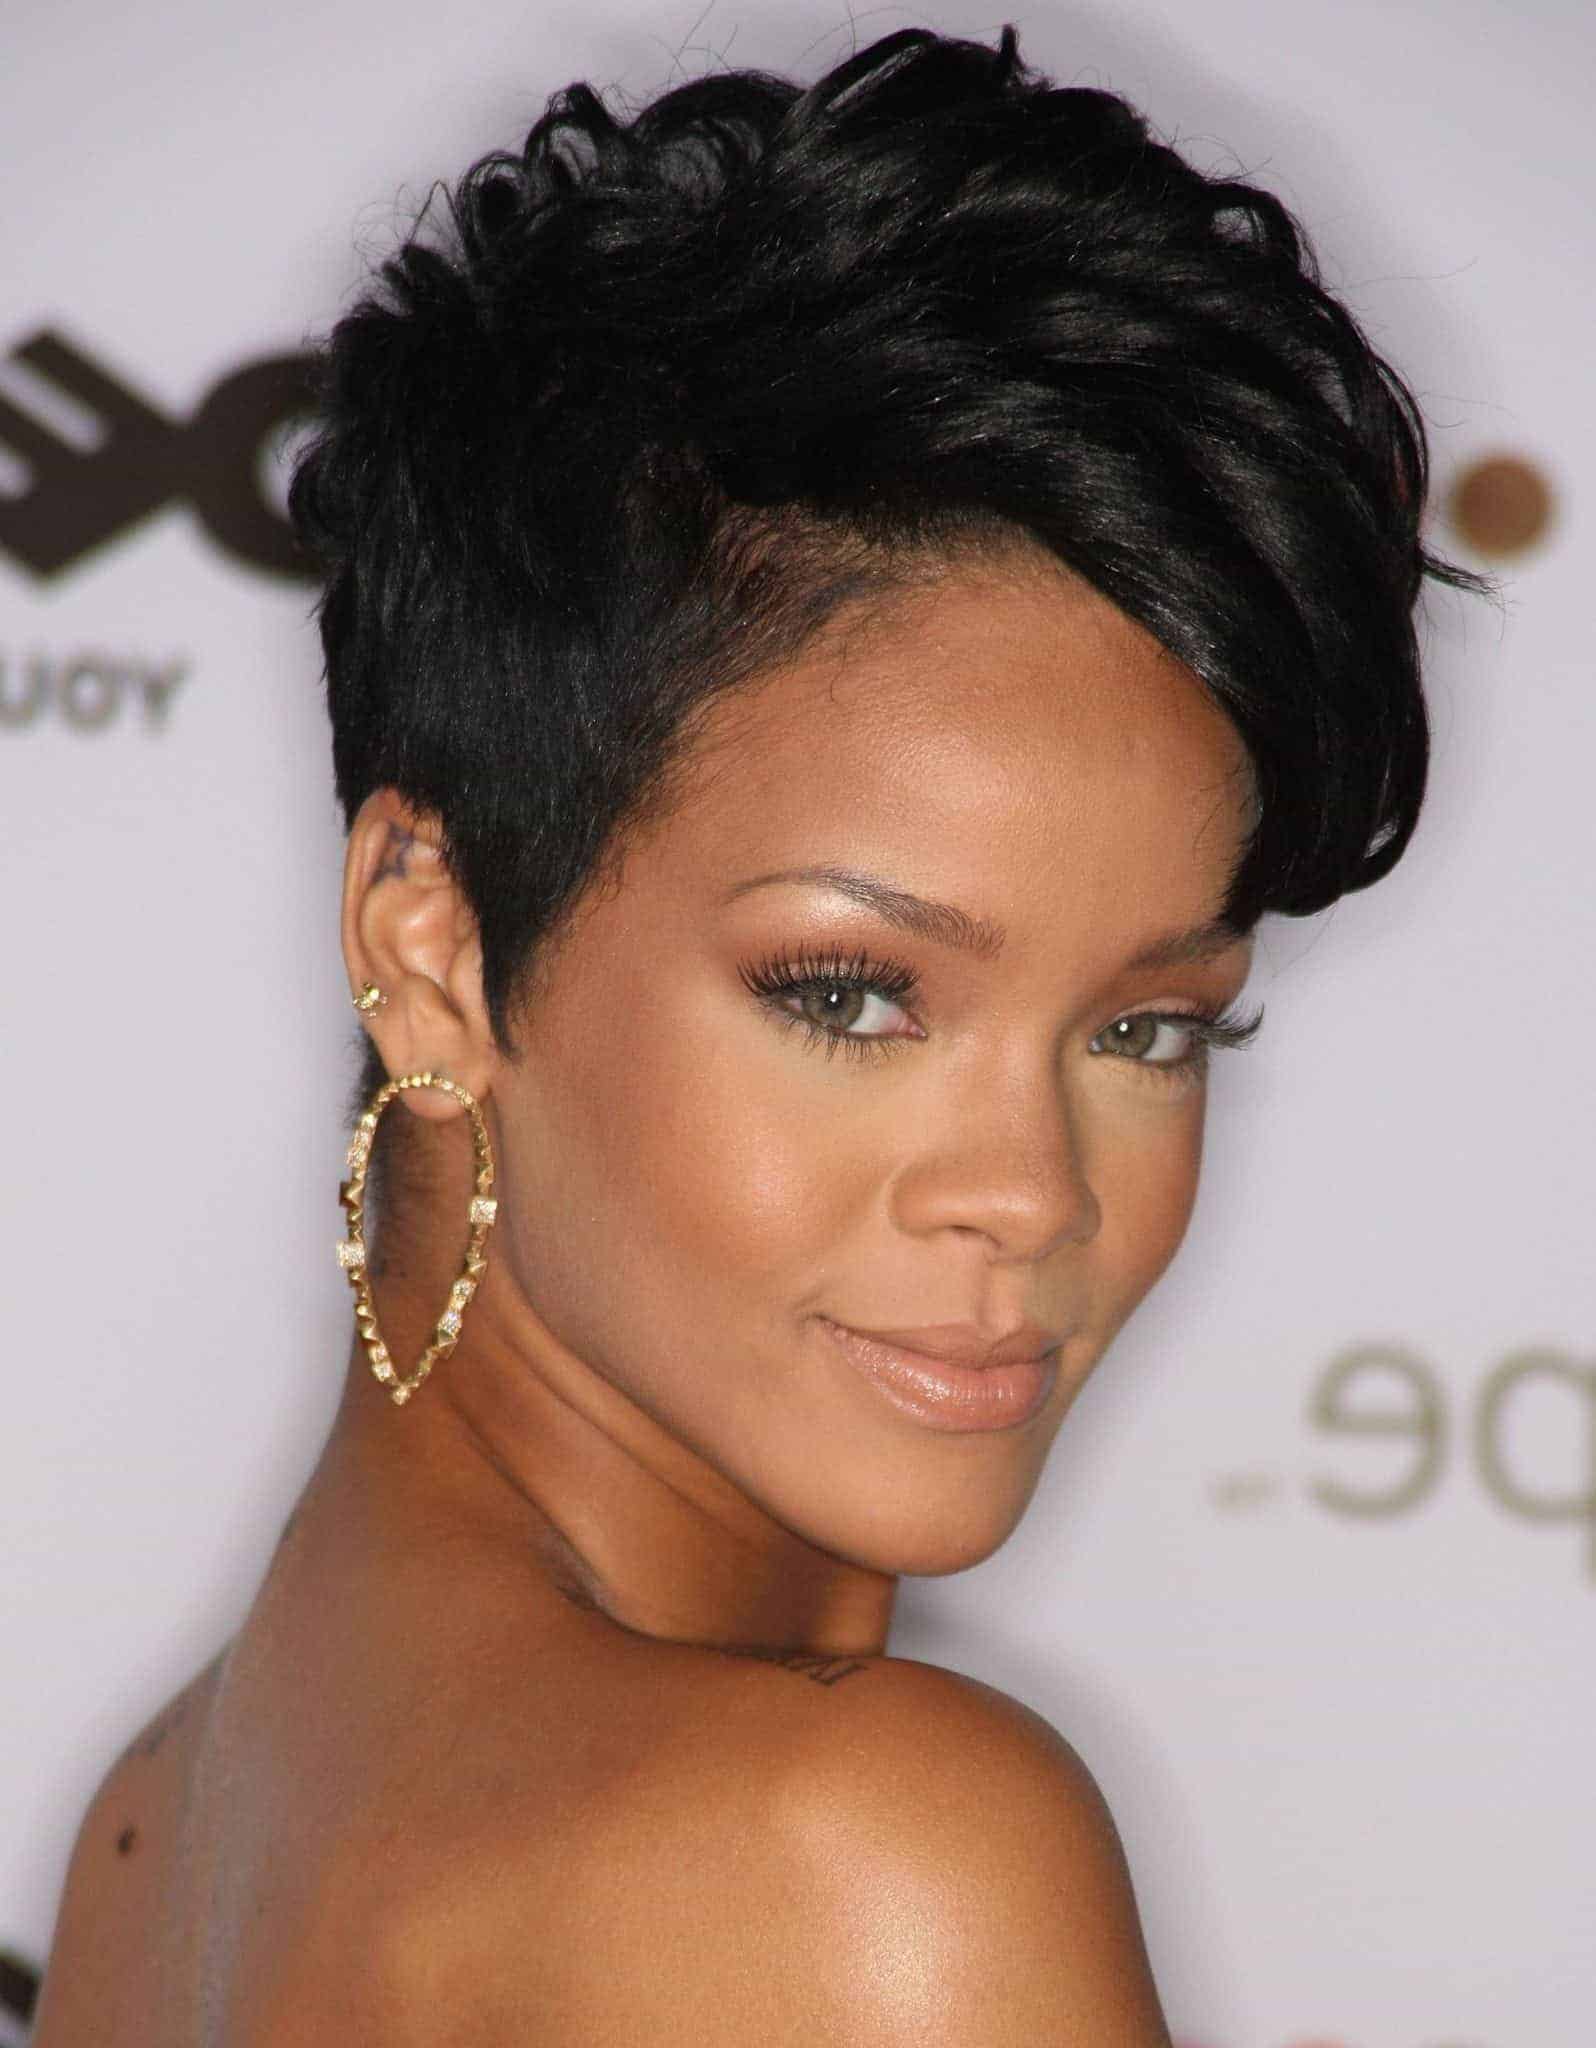 Short natural hairstyles for black women 2015, Women styles, hairstyles